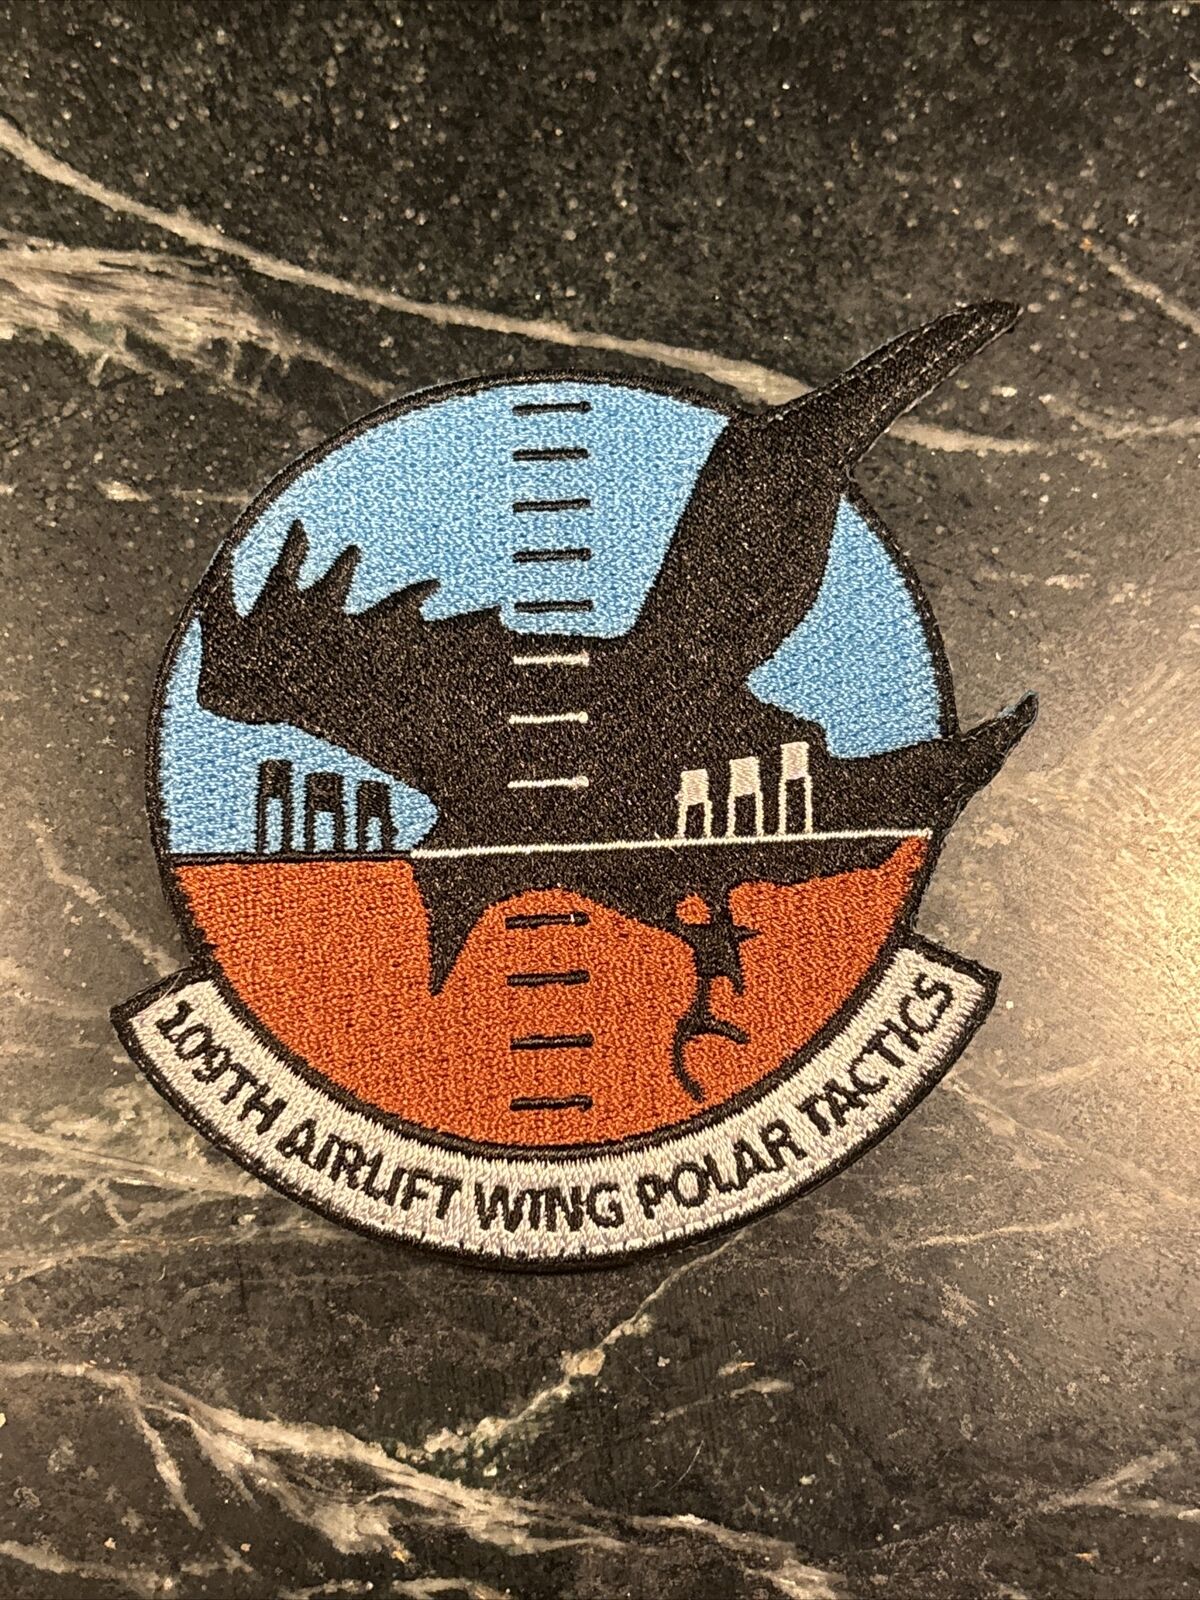 109th PATCH VELKRO RARE Airlift Wing SQUADRON TACTICAL Polar Tactics Morale